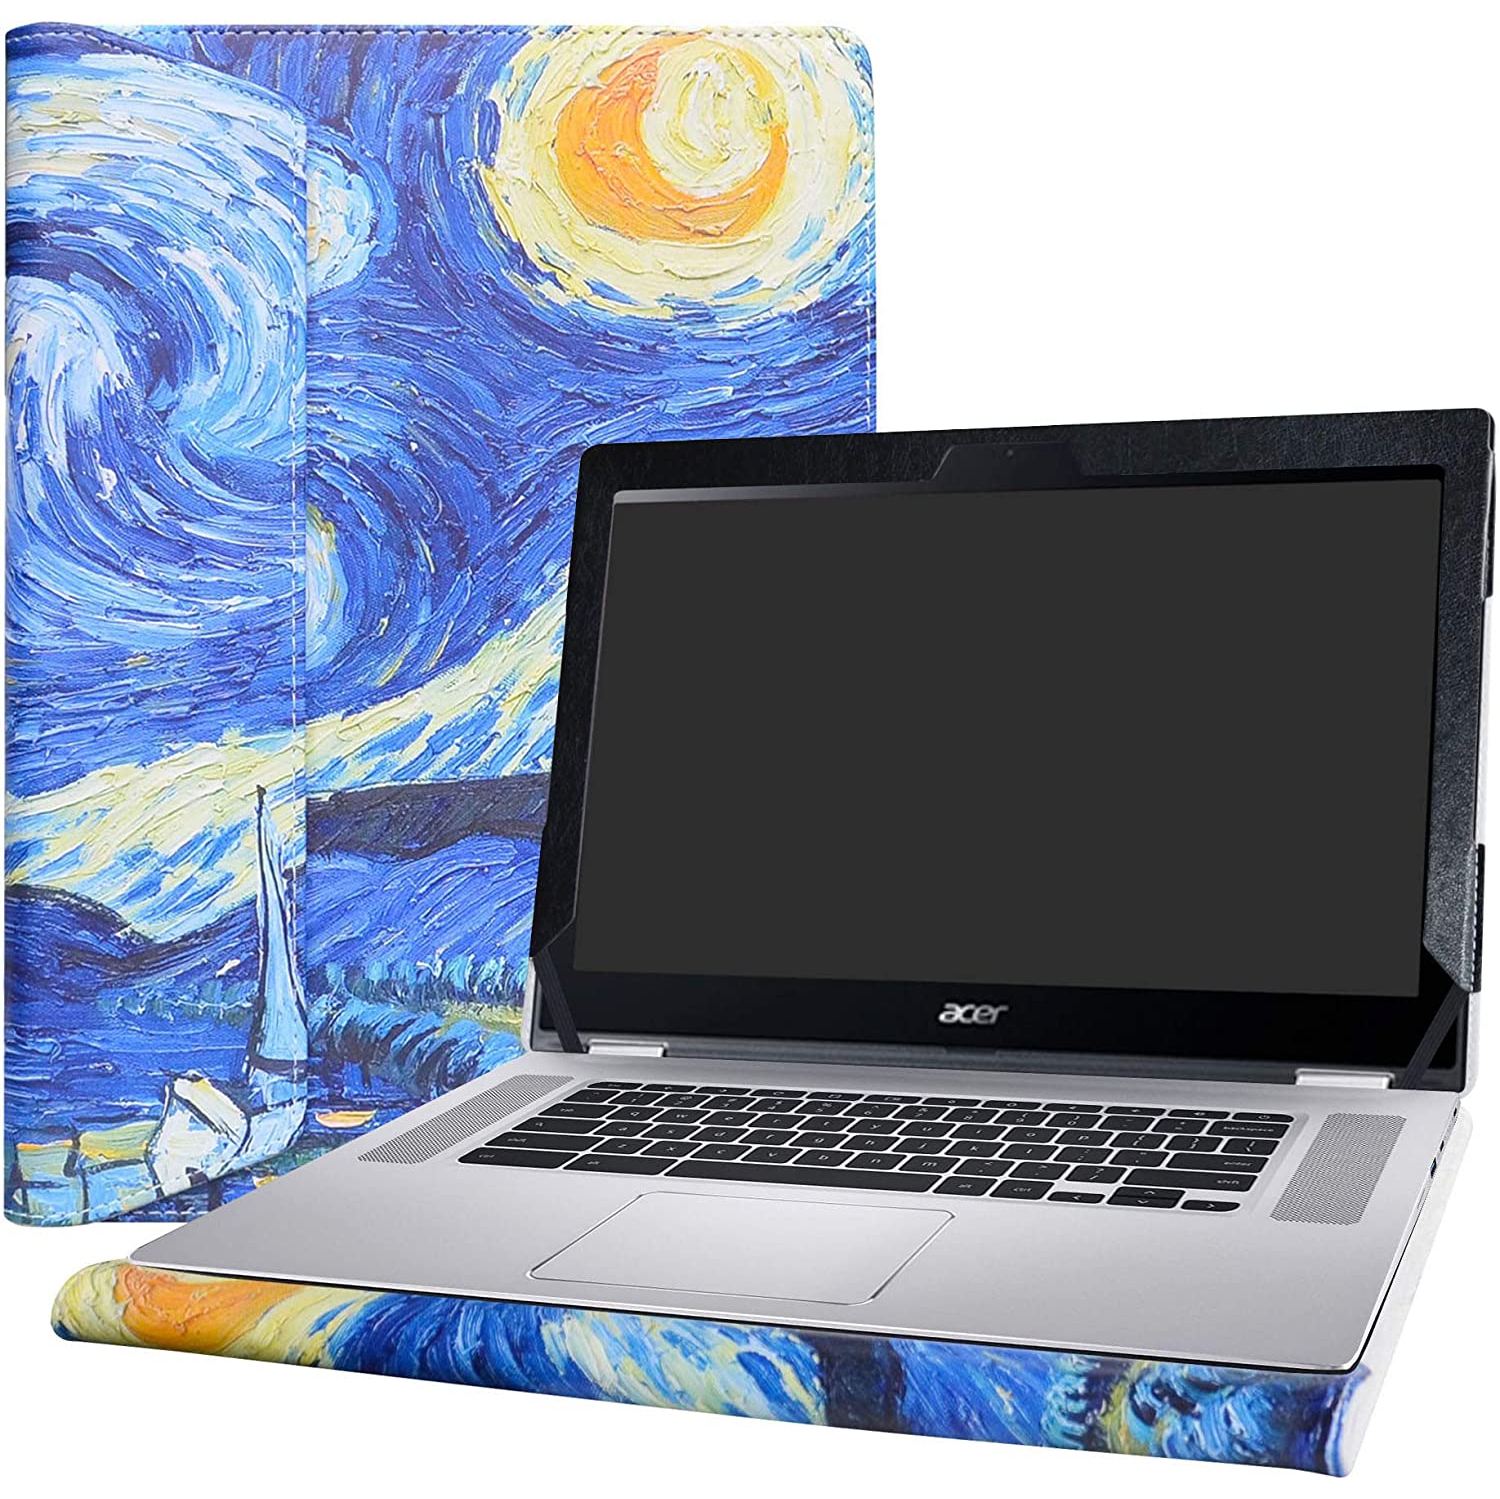 Protective Case Cover for 15.6" ACER CHROMEBOOK Spin 15 CP315-1H Series Laptop(Warning:Not fit Acer Chromebook